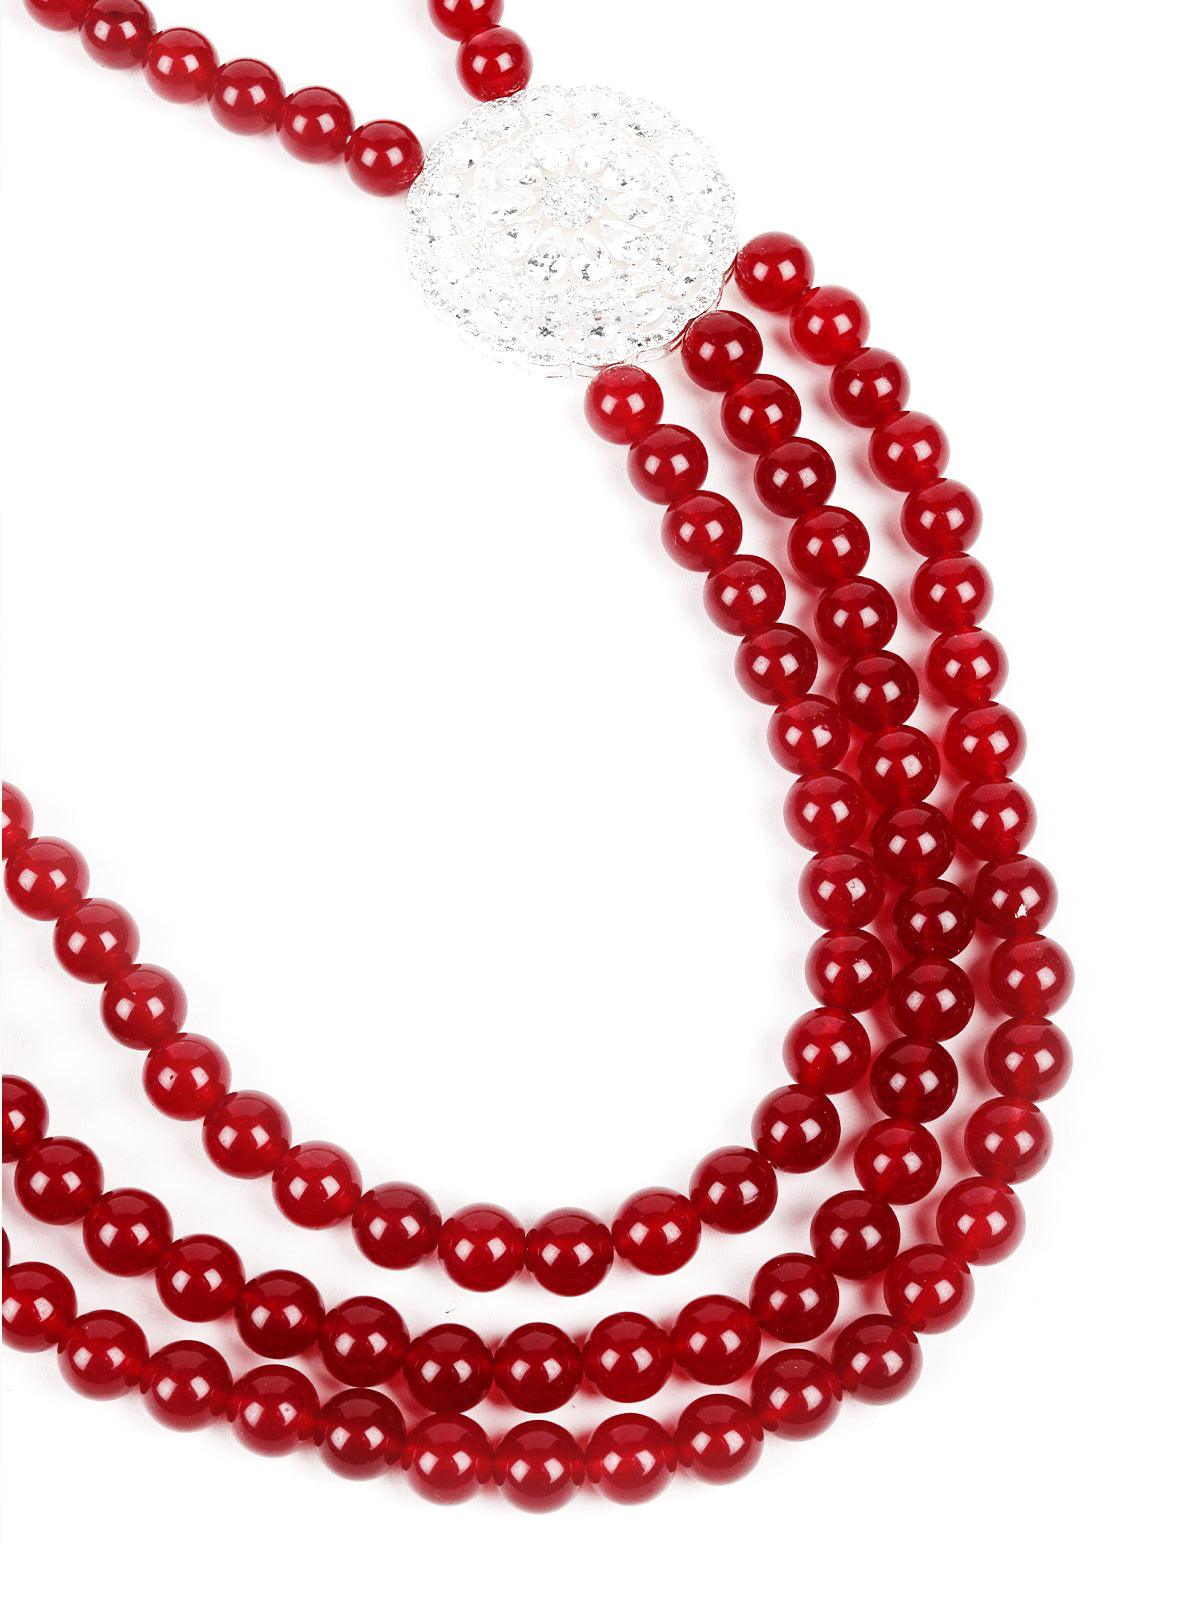 Women's Ruby Onyx Beads Loop Necklace Set With Silver Embellishments - Odette